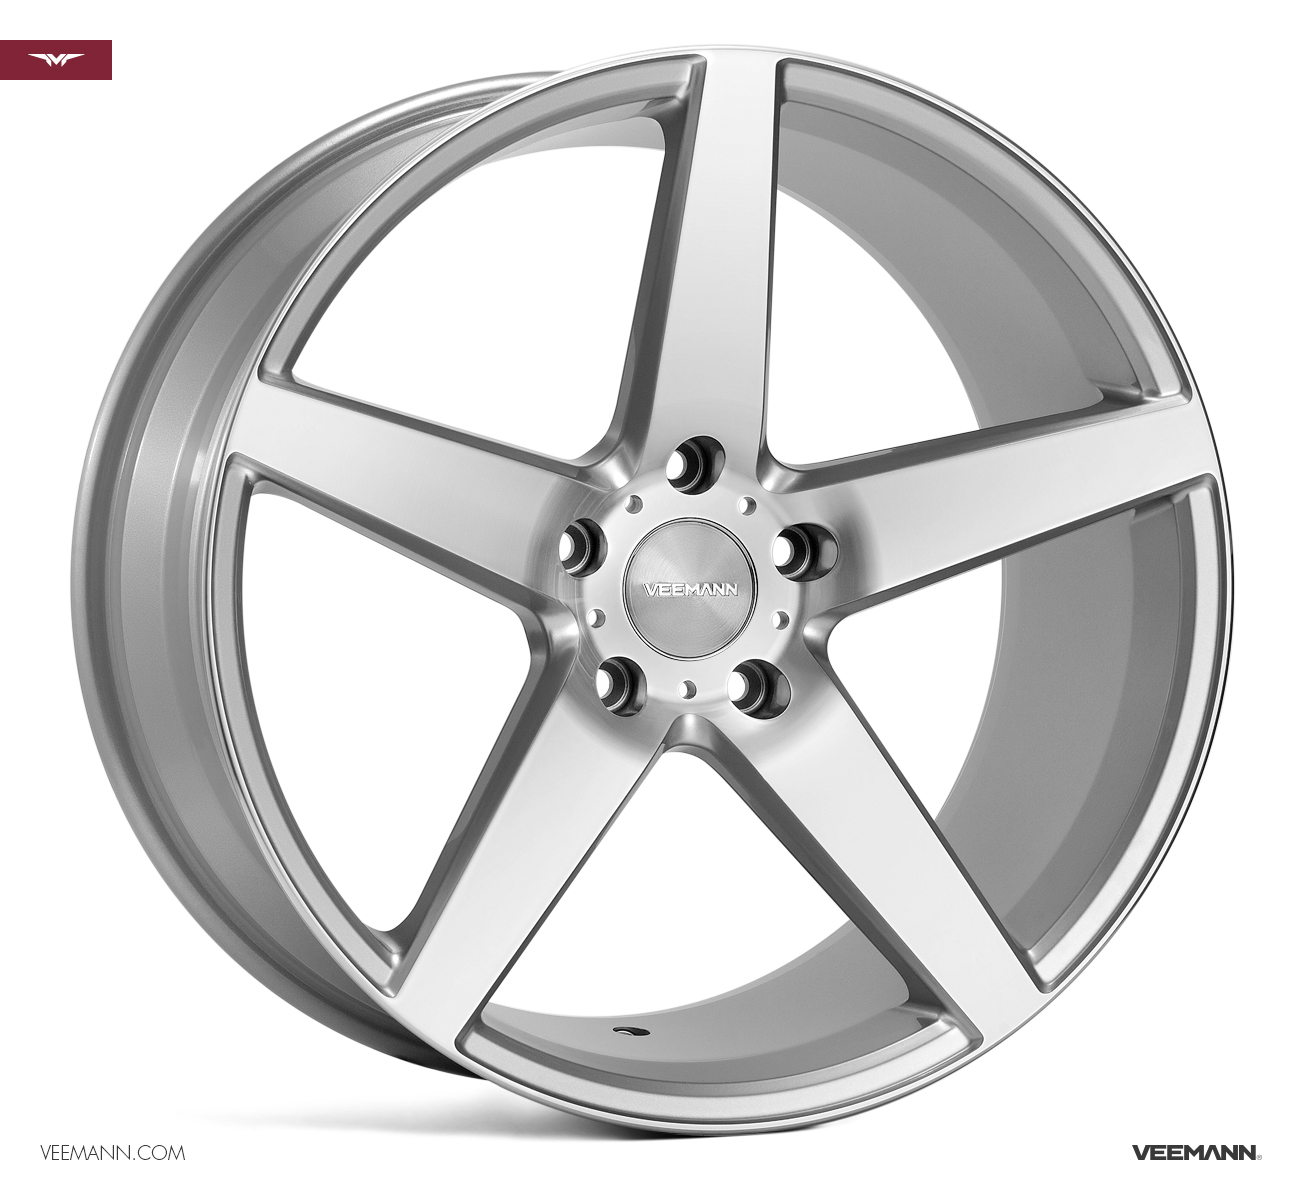 NEW 20  VEEMANN V FS8 5 SPOKE CONCAVE ALLOY WHEELS IN SILVER WITH POLISHED FACE  WIDER 10  REARS